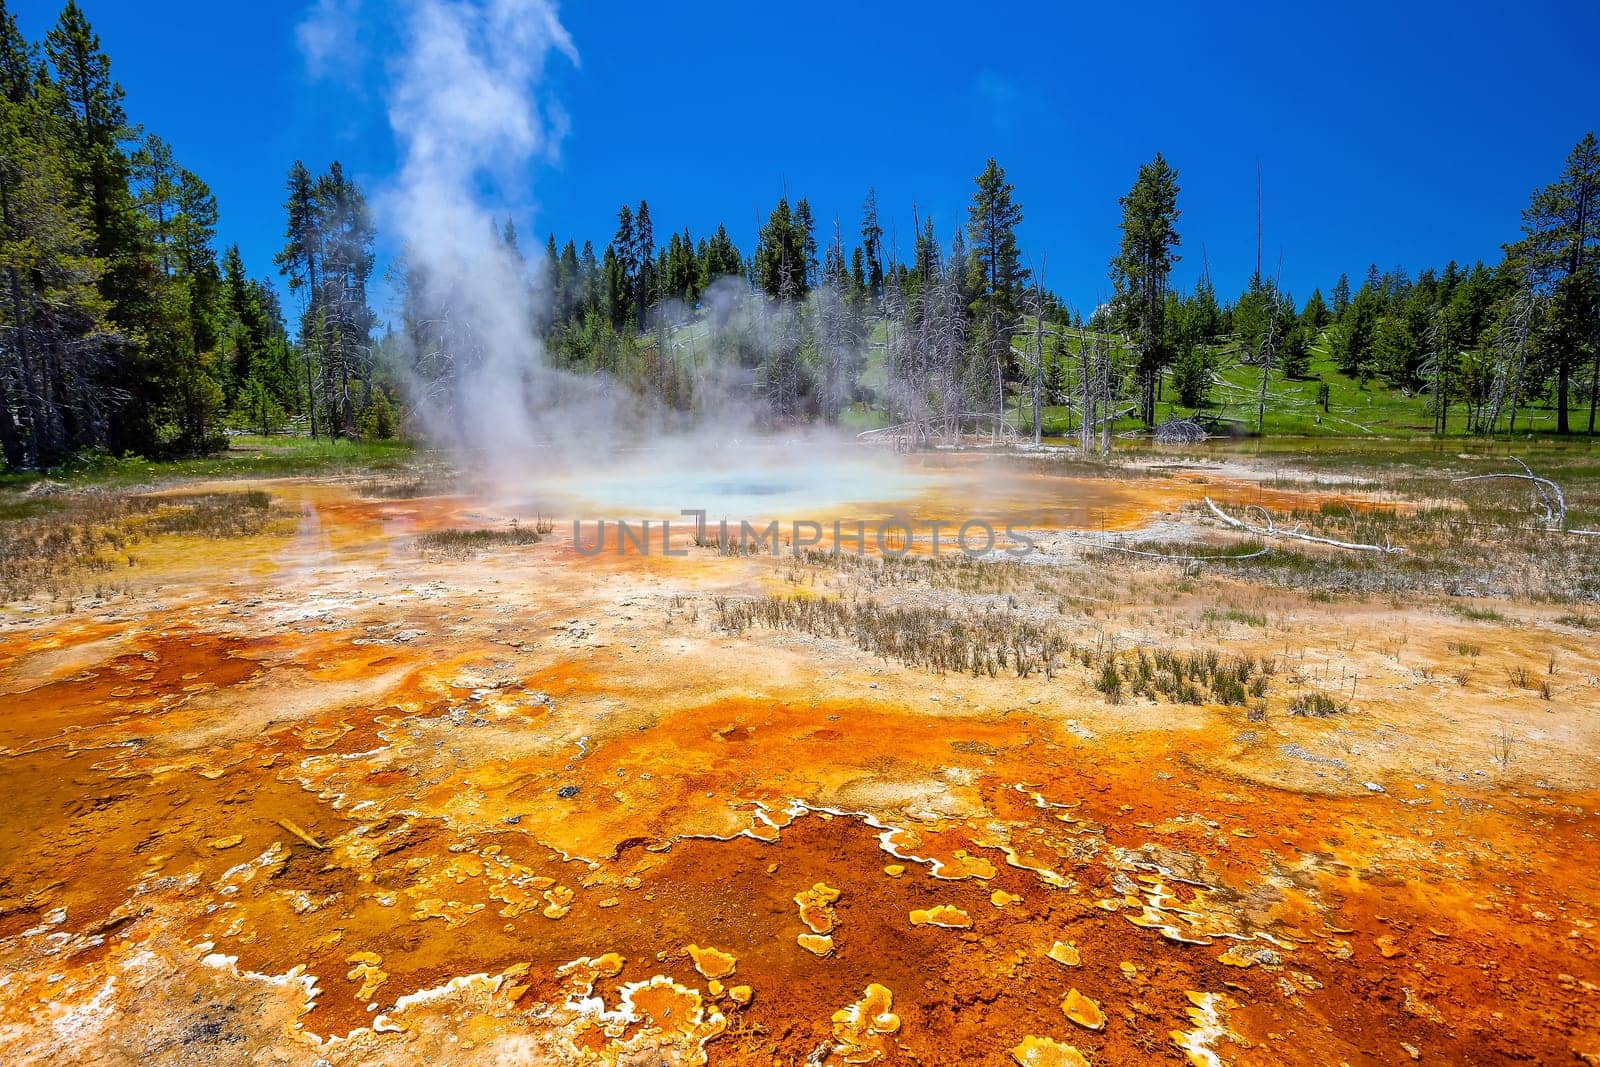  Hot spring in Yellow stone National Park in USA by f11photo